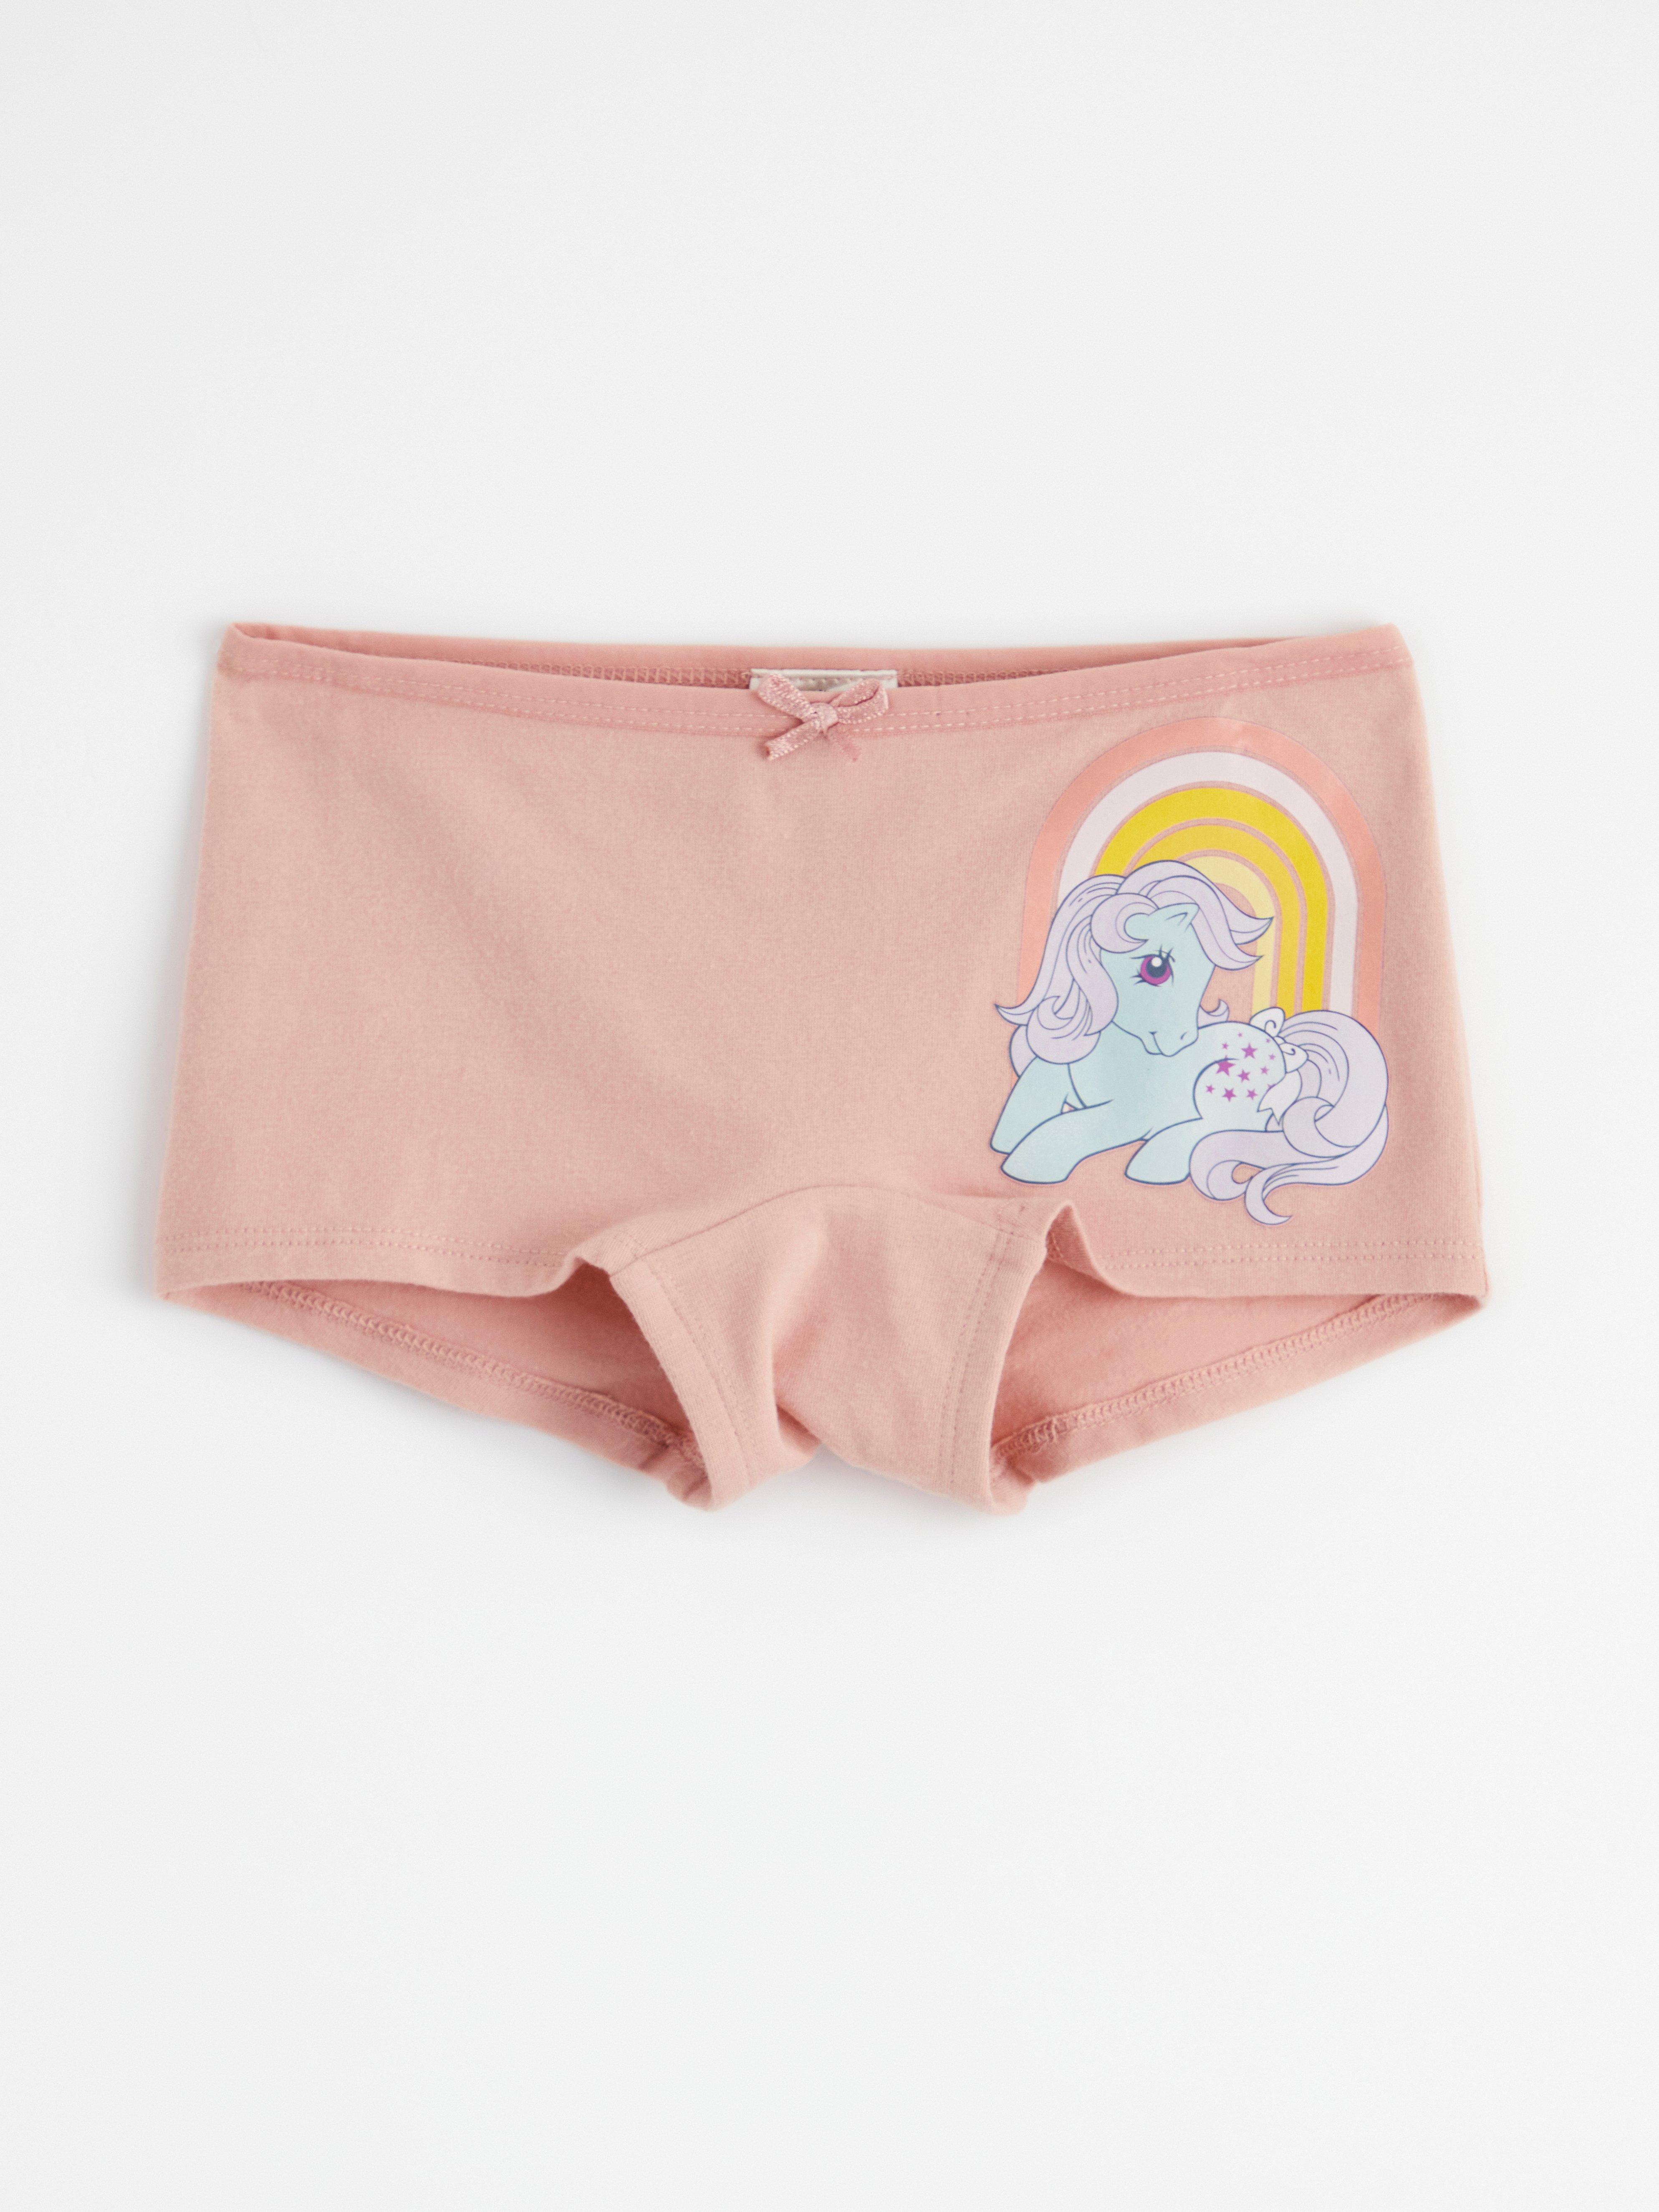 Briefs with My Little Pony print